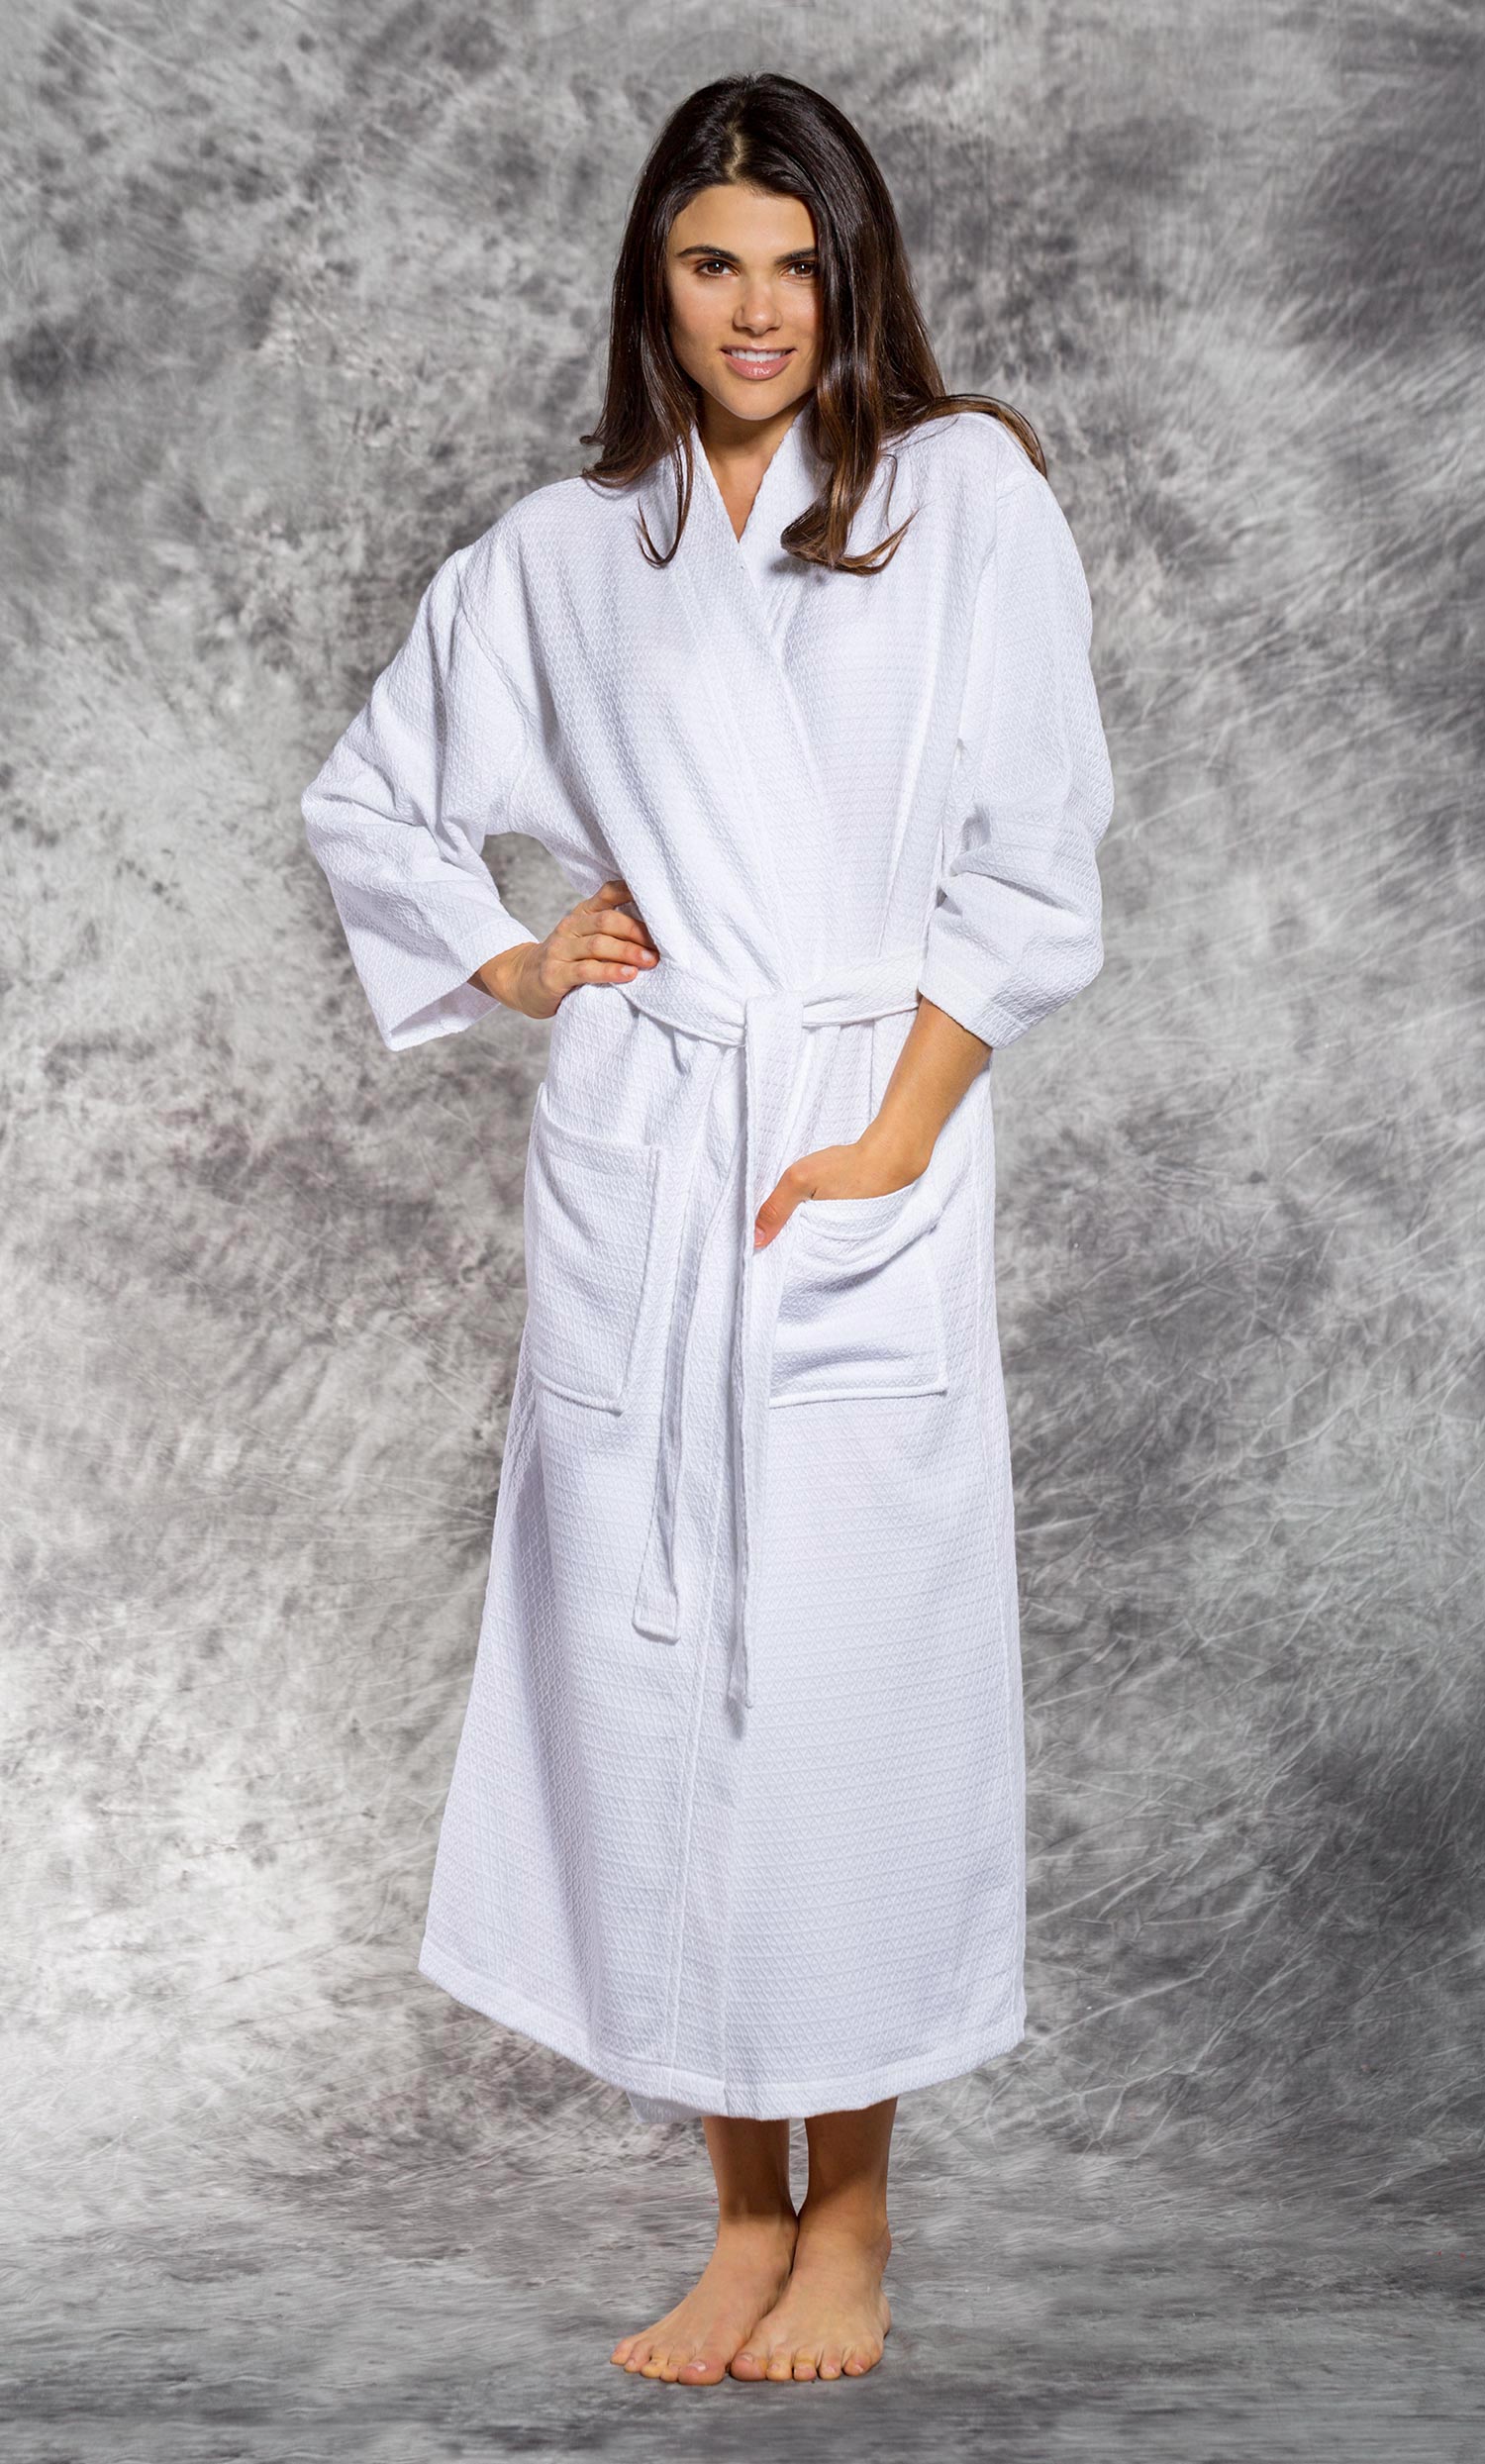 Quickly Least blue whale Economy Bathrobes :: Full Length Waffle Robes :: NEW! 100% Turkish Cotton  White Waffle Kimono Robe - Turquaz Linen, Towels, Robes, Linen and More!